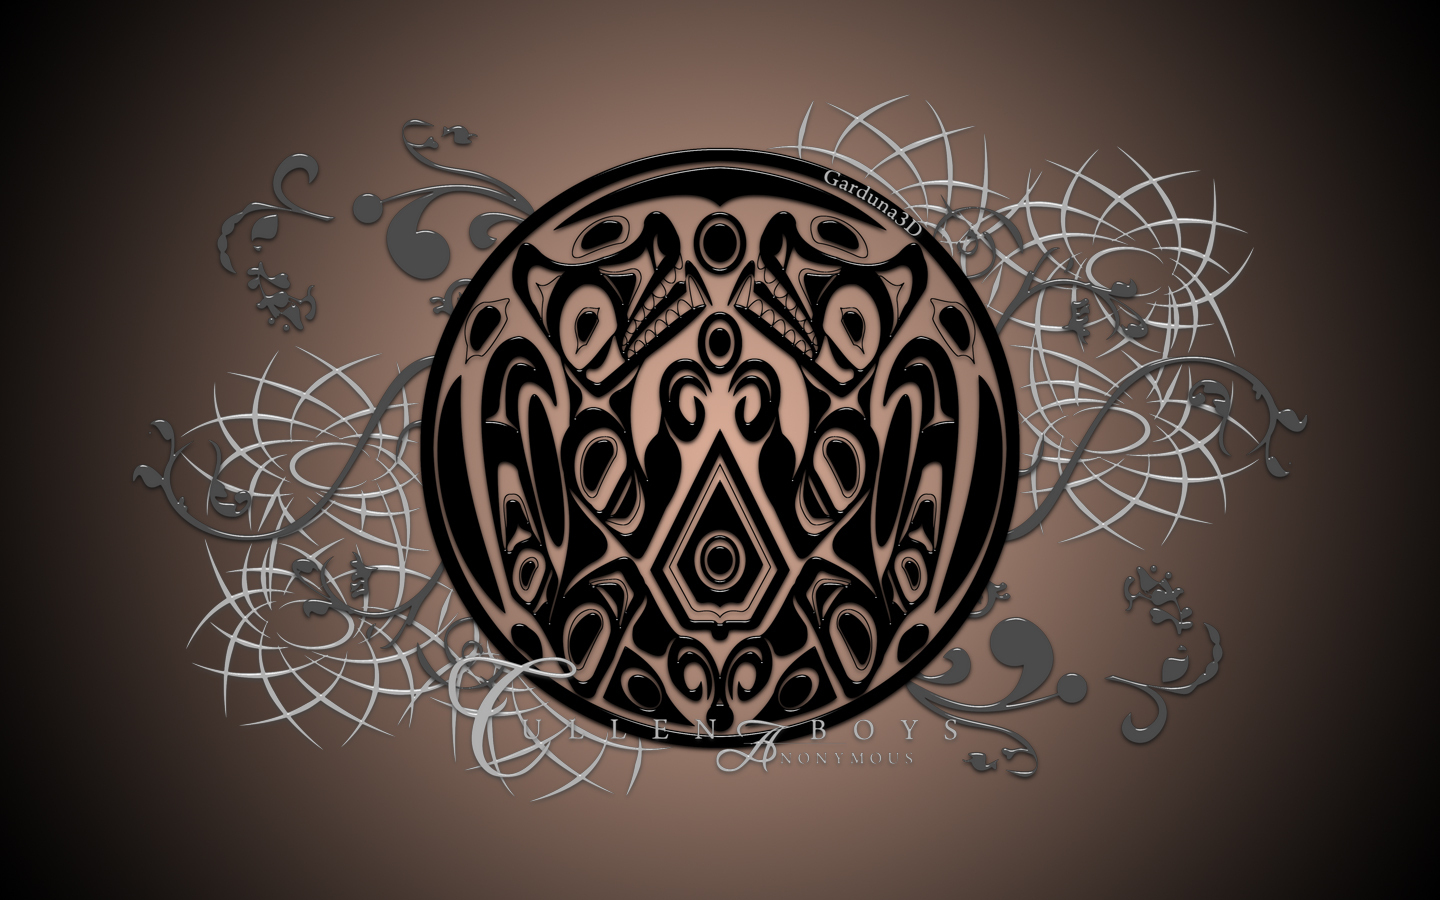 Credit Cullen Boys Anonimous - Quileute Tattoo - HD Wallpaper 